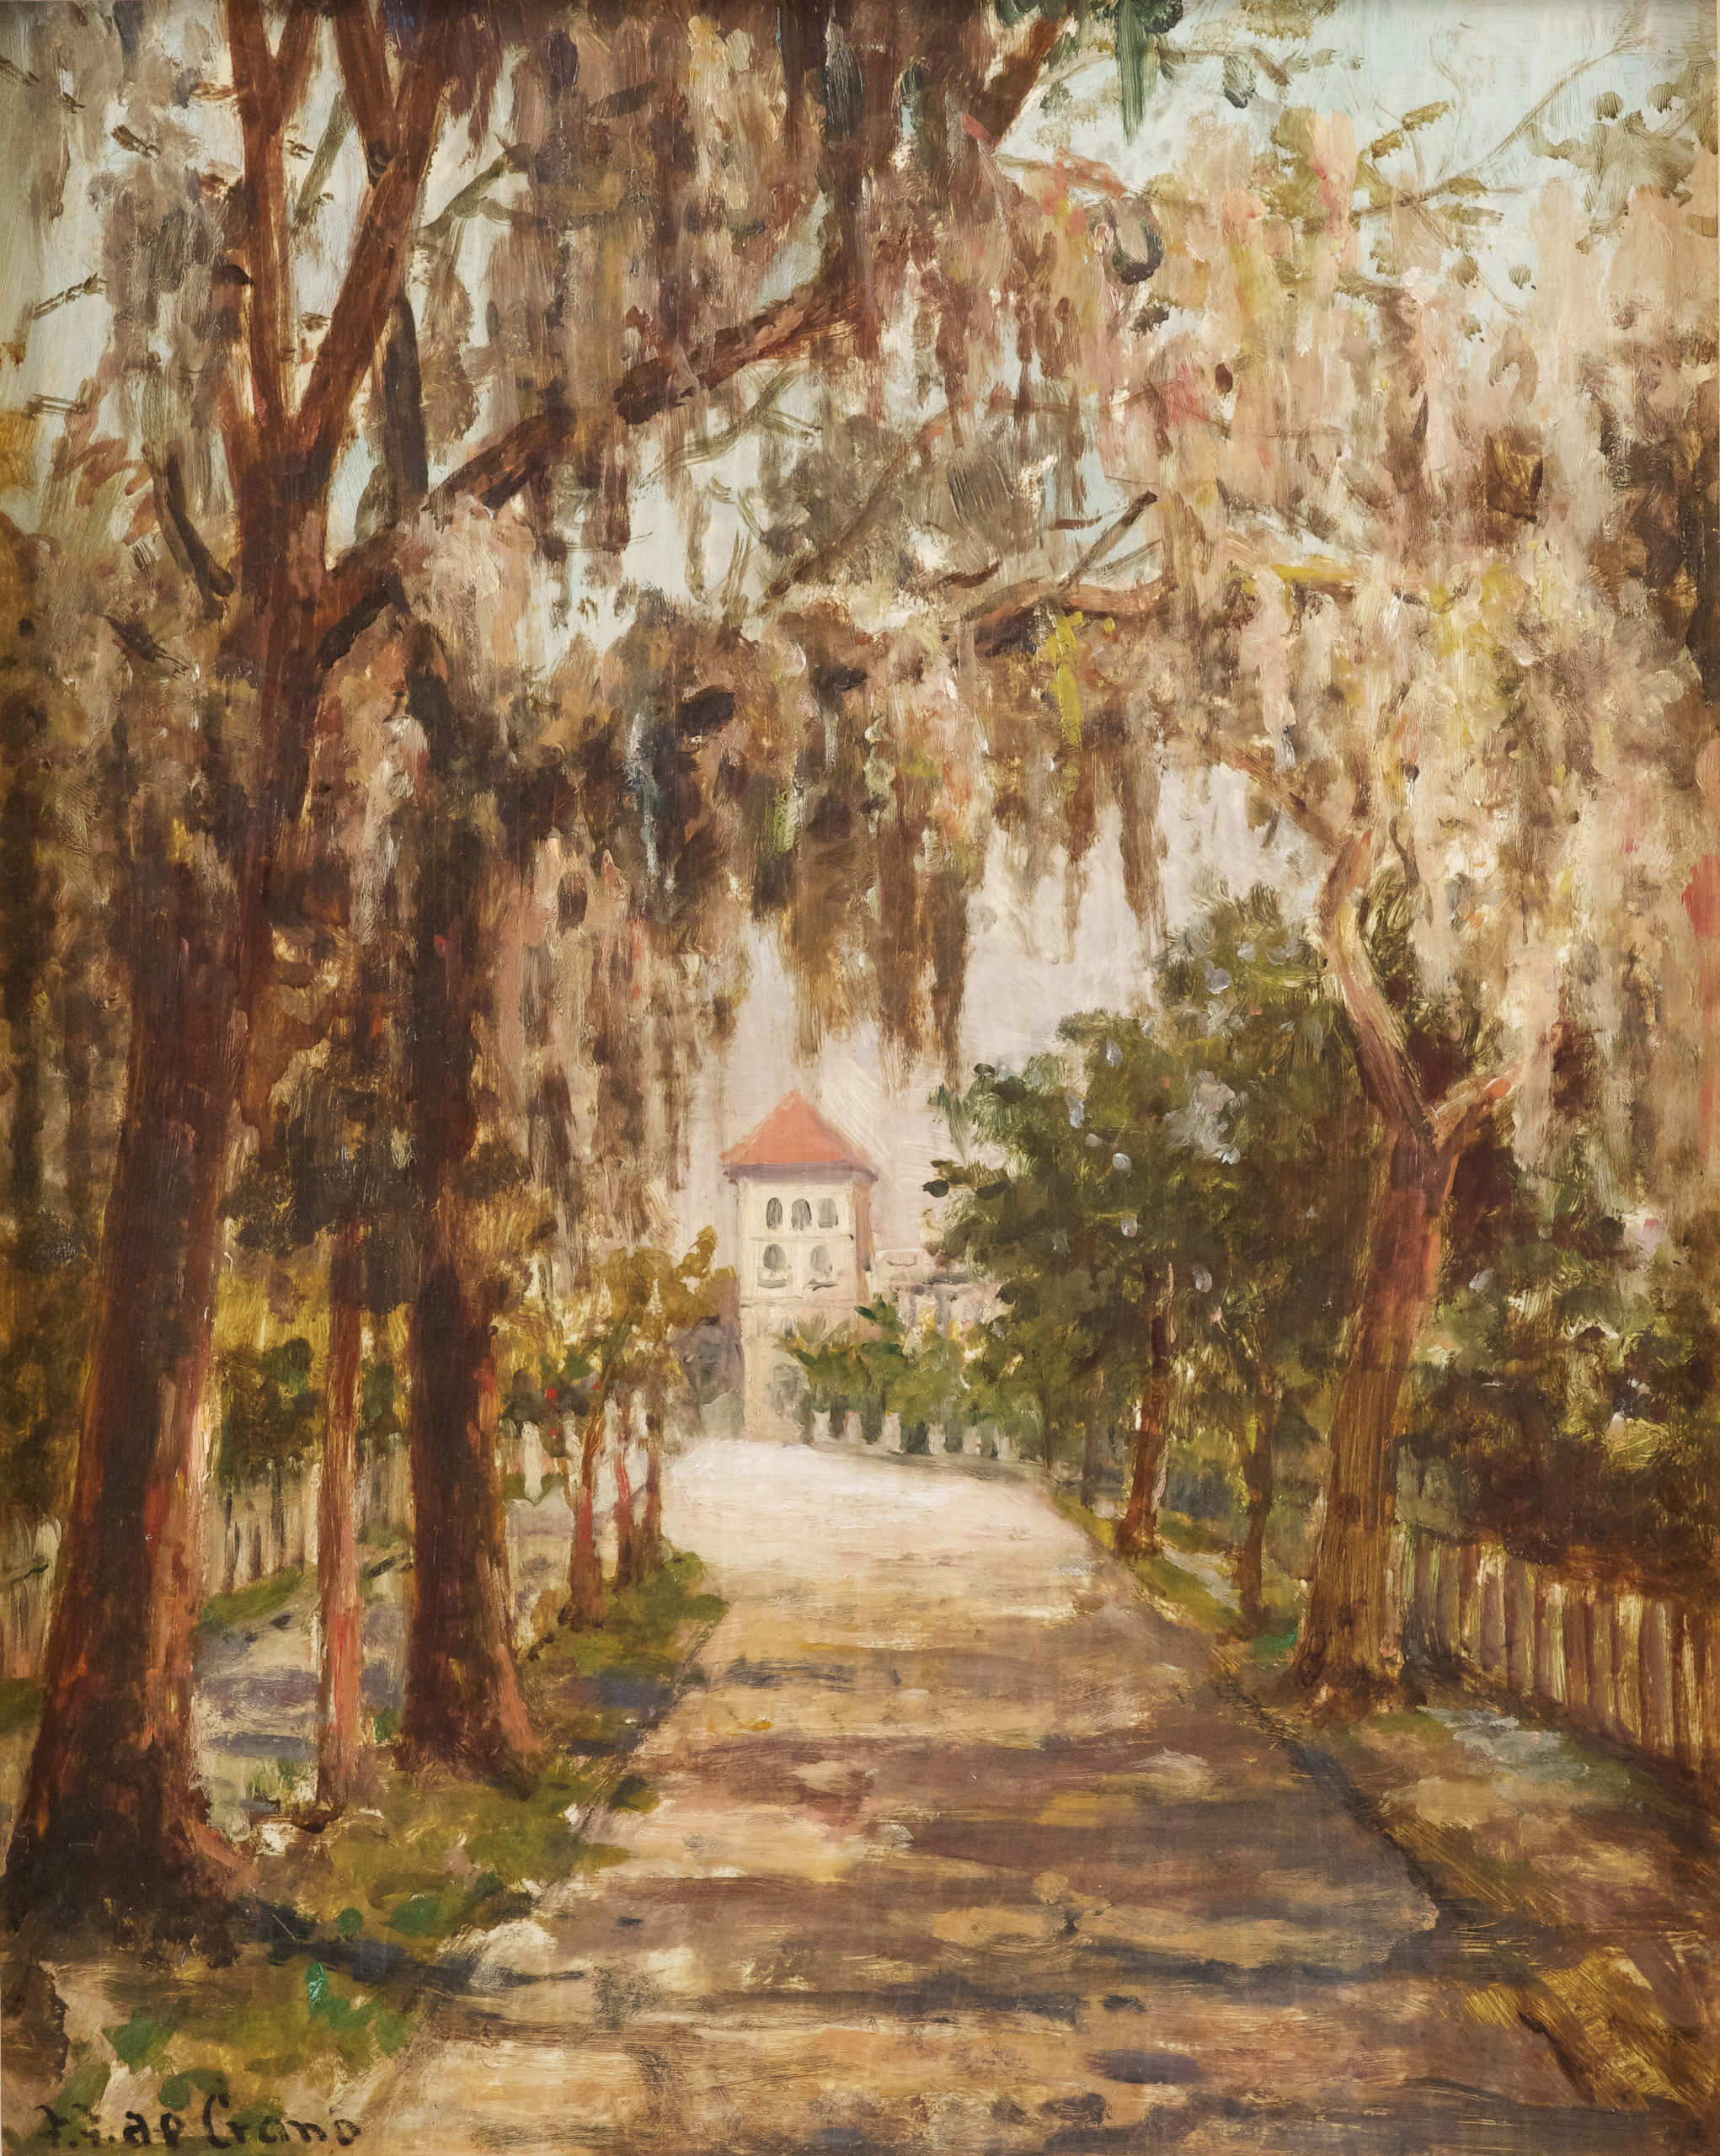 Download St Augustine In A New Light American Impressionism From The Collection Of The Lightner Museum Lightner Museum